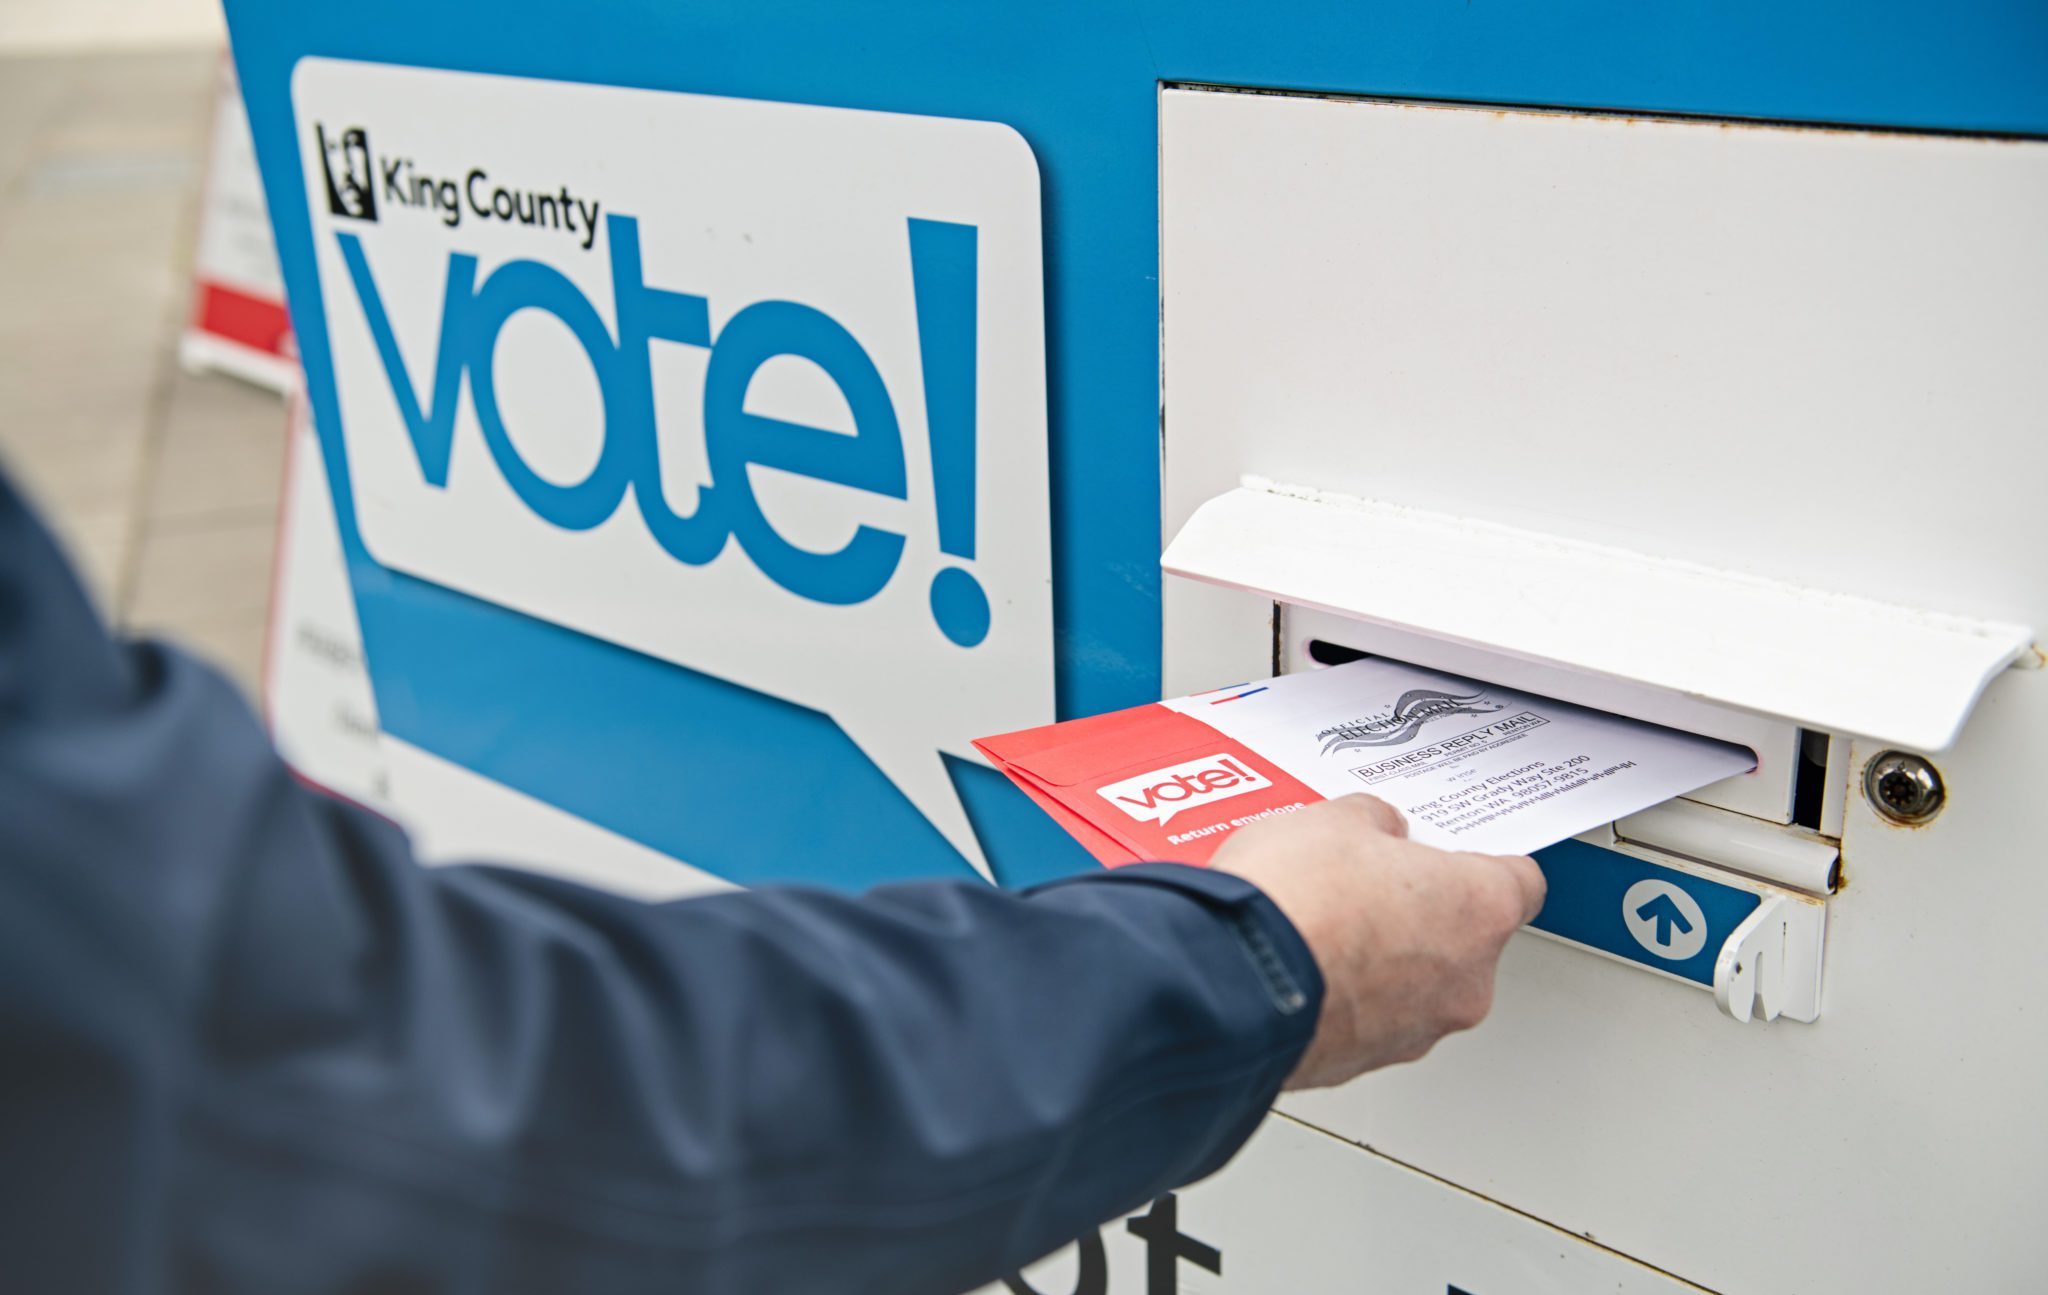 Making Vote by Mail Permanent